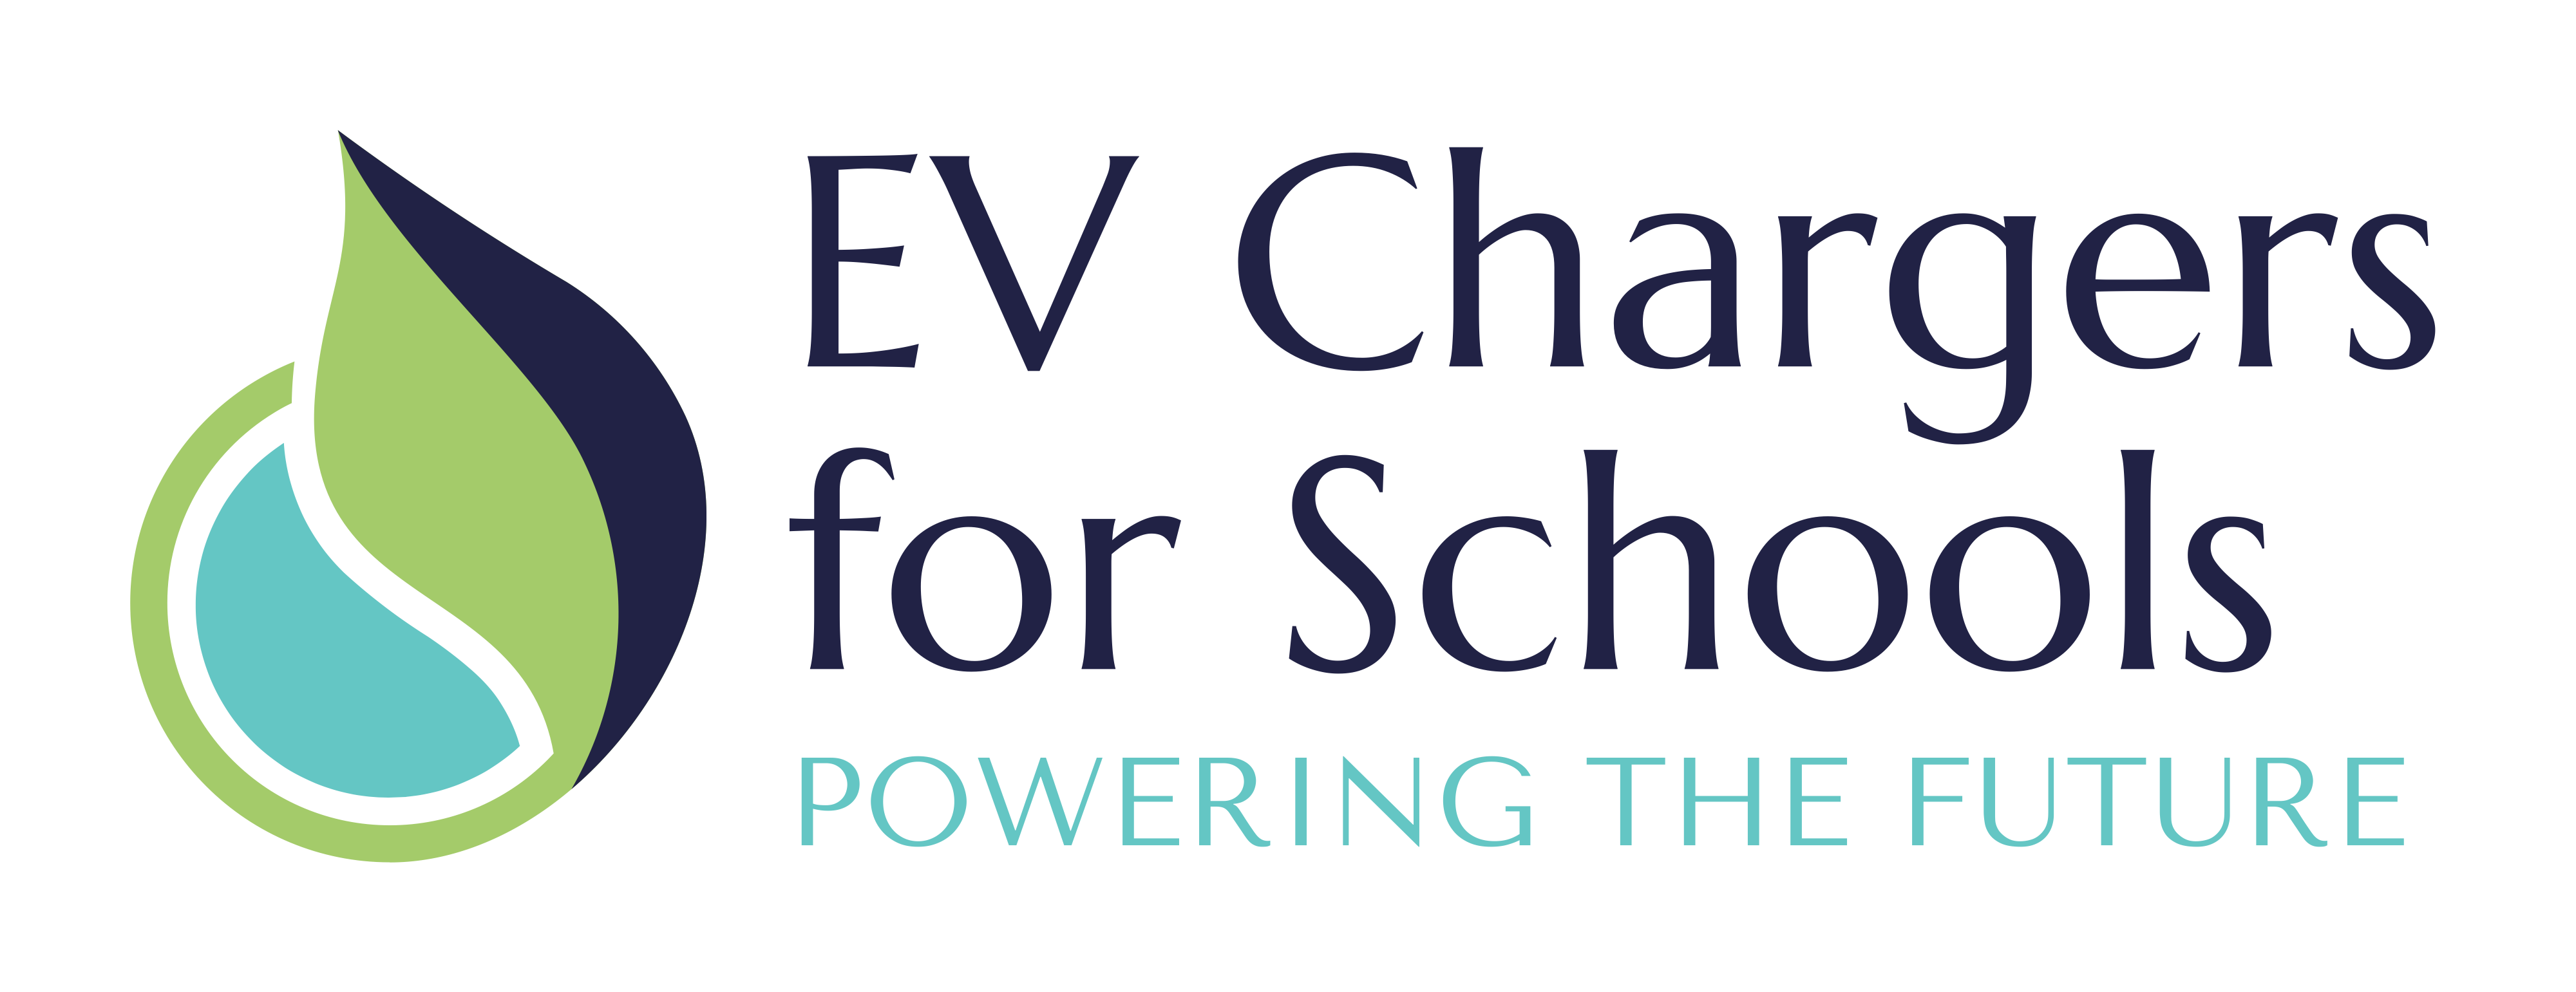 EV Chargers for Schools logo